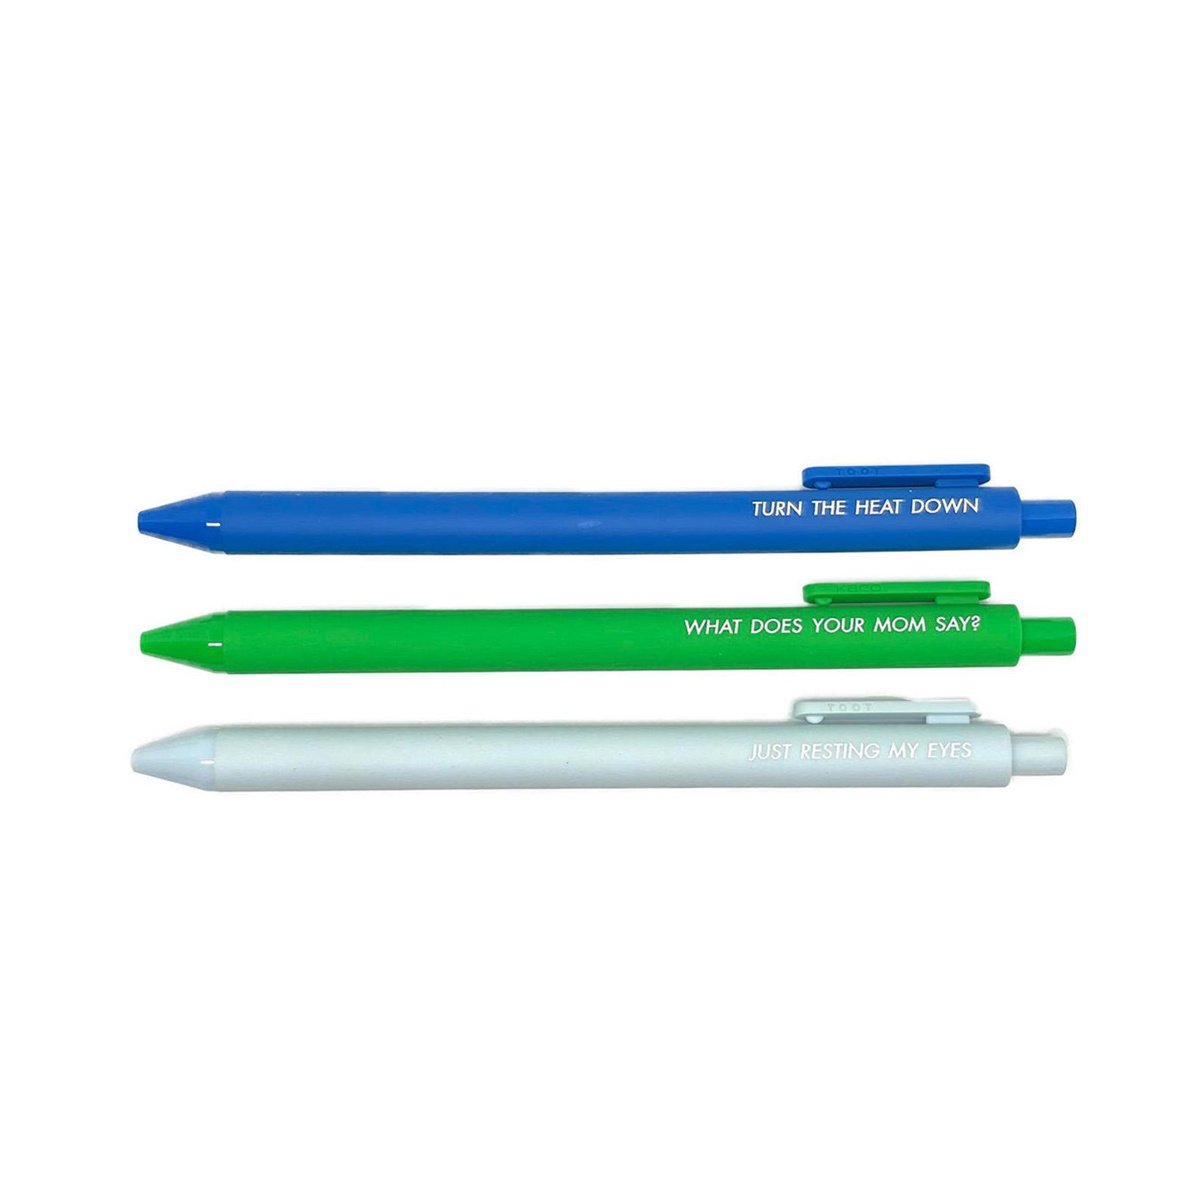 Tiny Hooray - TIH (formerly Little Goat, LG) Pens for Dads Who Need a Break: set of 3